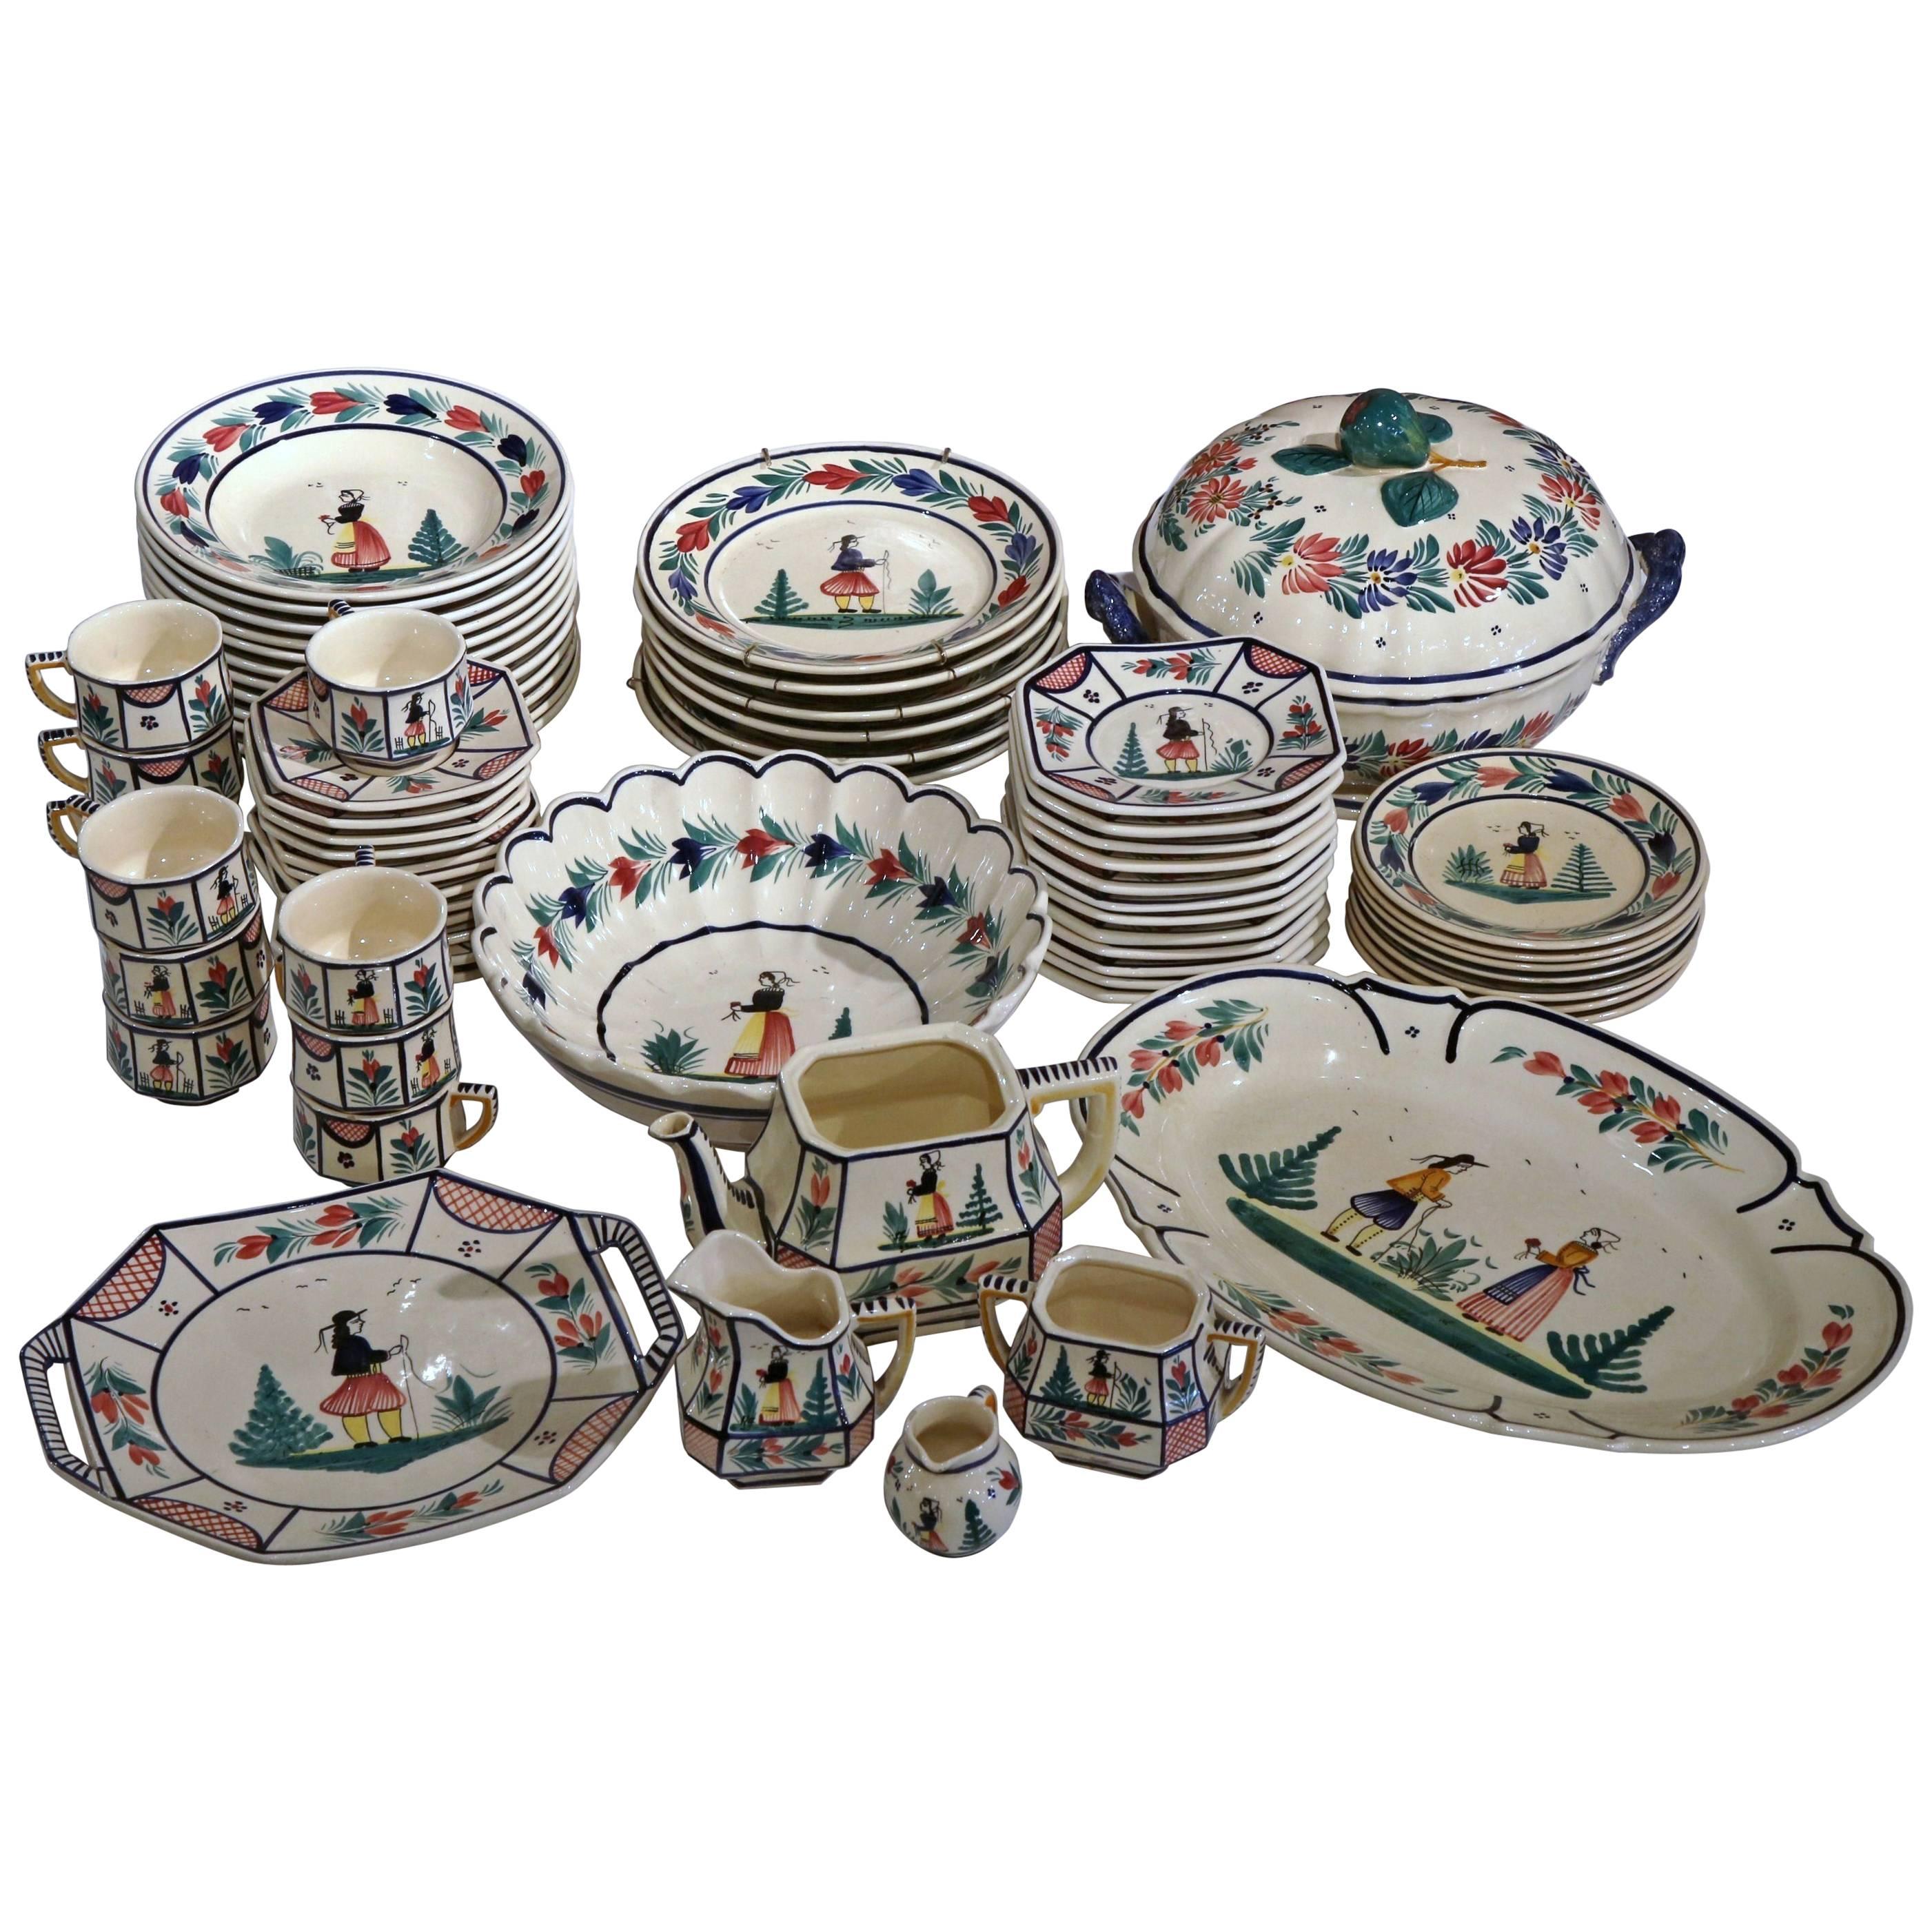 Set of 19th Century French Hand-Painted Decorative Dishes from Quimper, Brittany